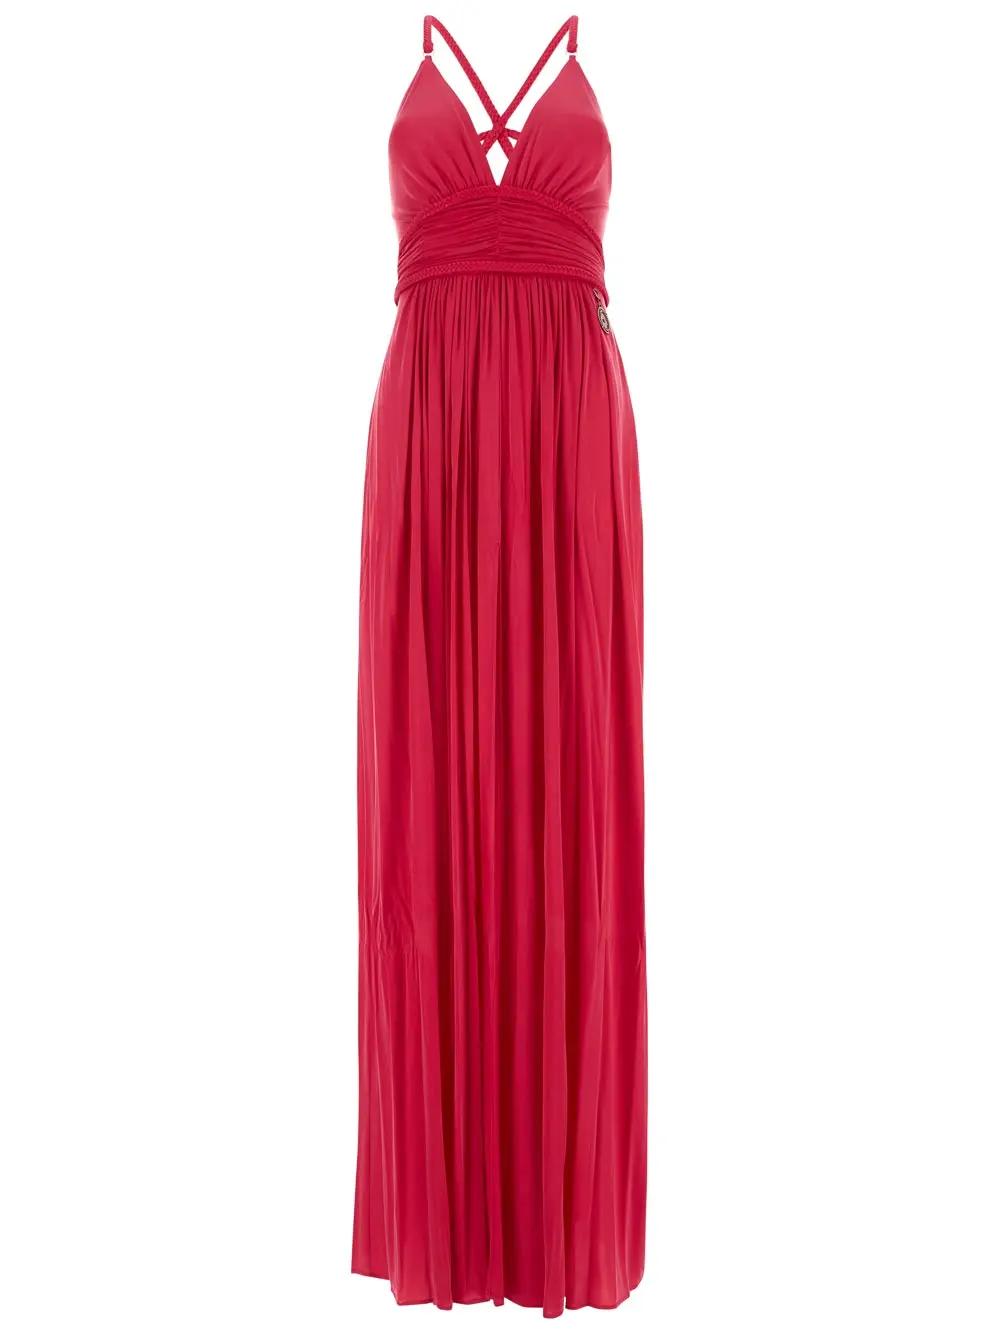 Elisabetta Franchi Red Carpet Dress With Intertwined Straps